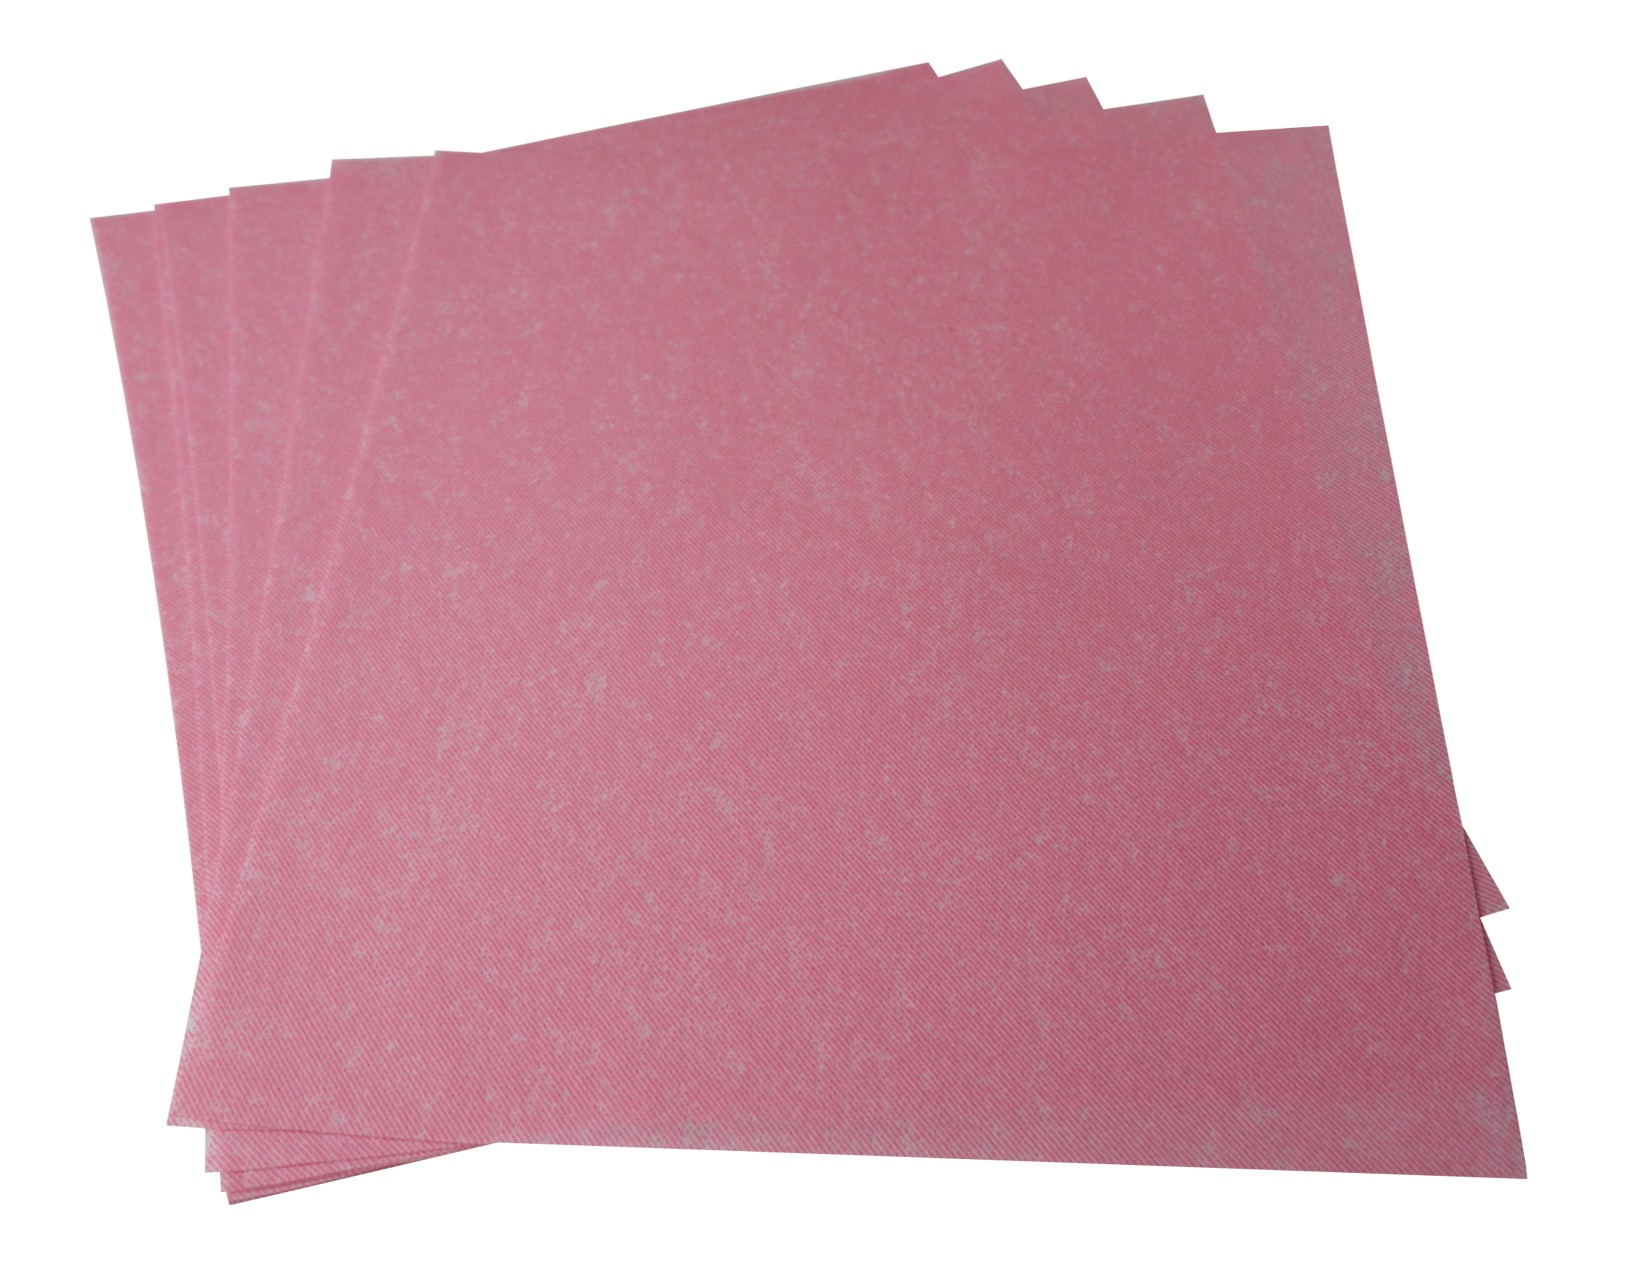 10/Pk 3M Pink Wet or Dry Tri-M-Ite Polishing Papers 3 Micron 4000 Grit